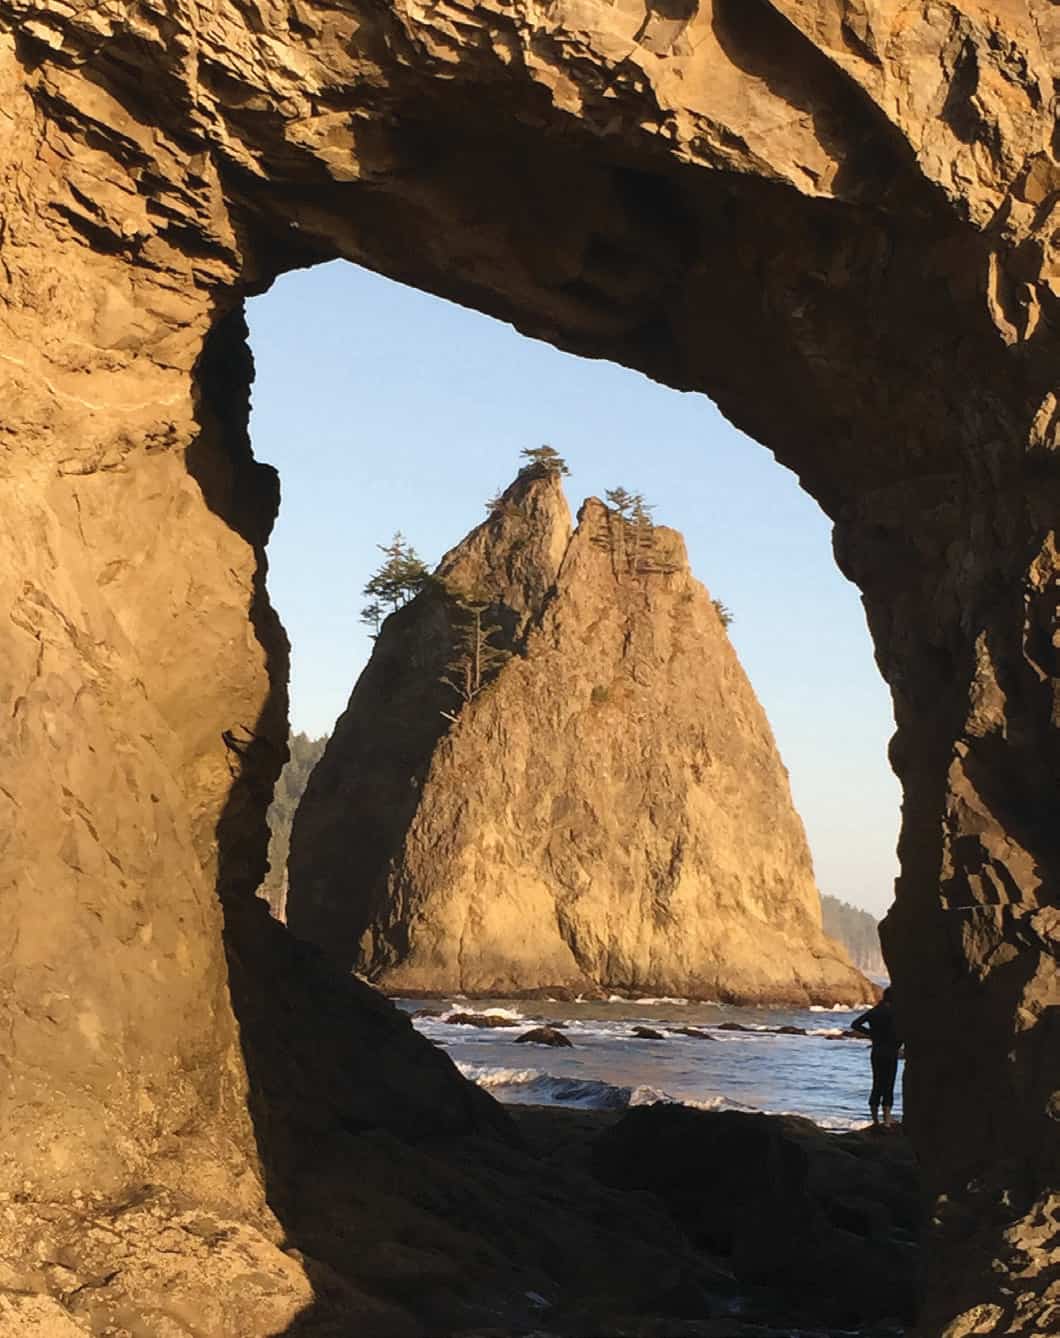 Another Instagram moment at Hole-in-the-Wall at Rialto Beach.